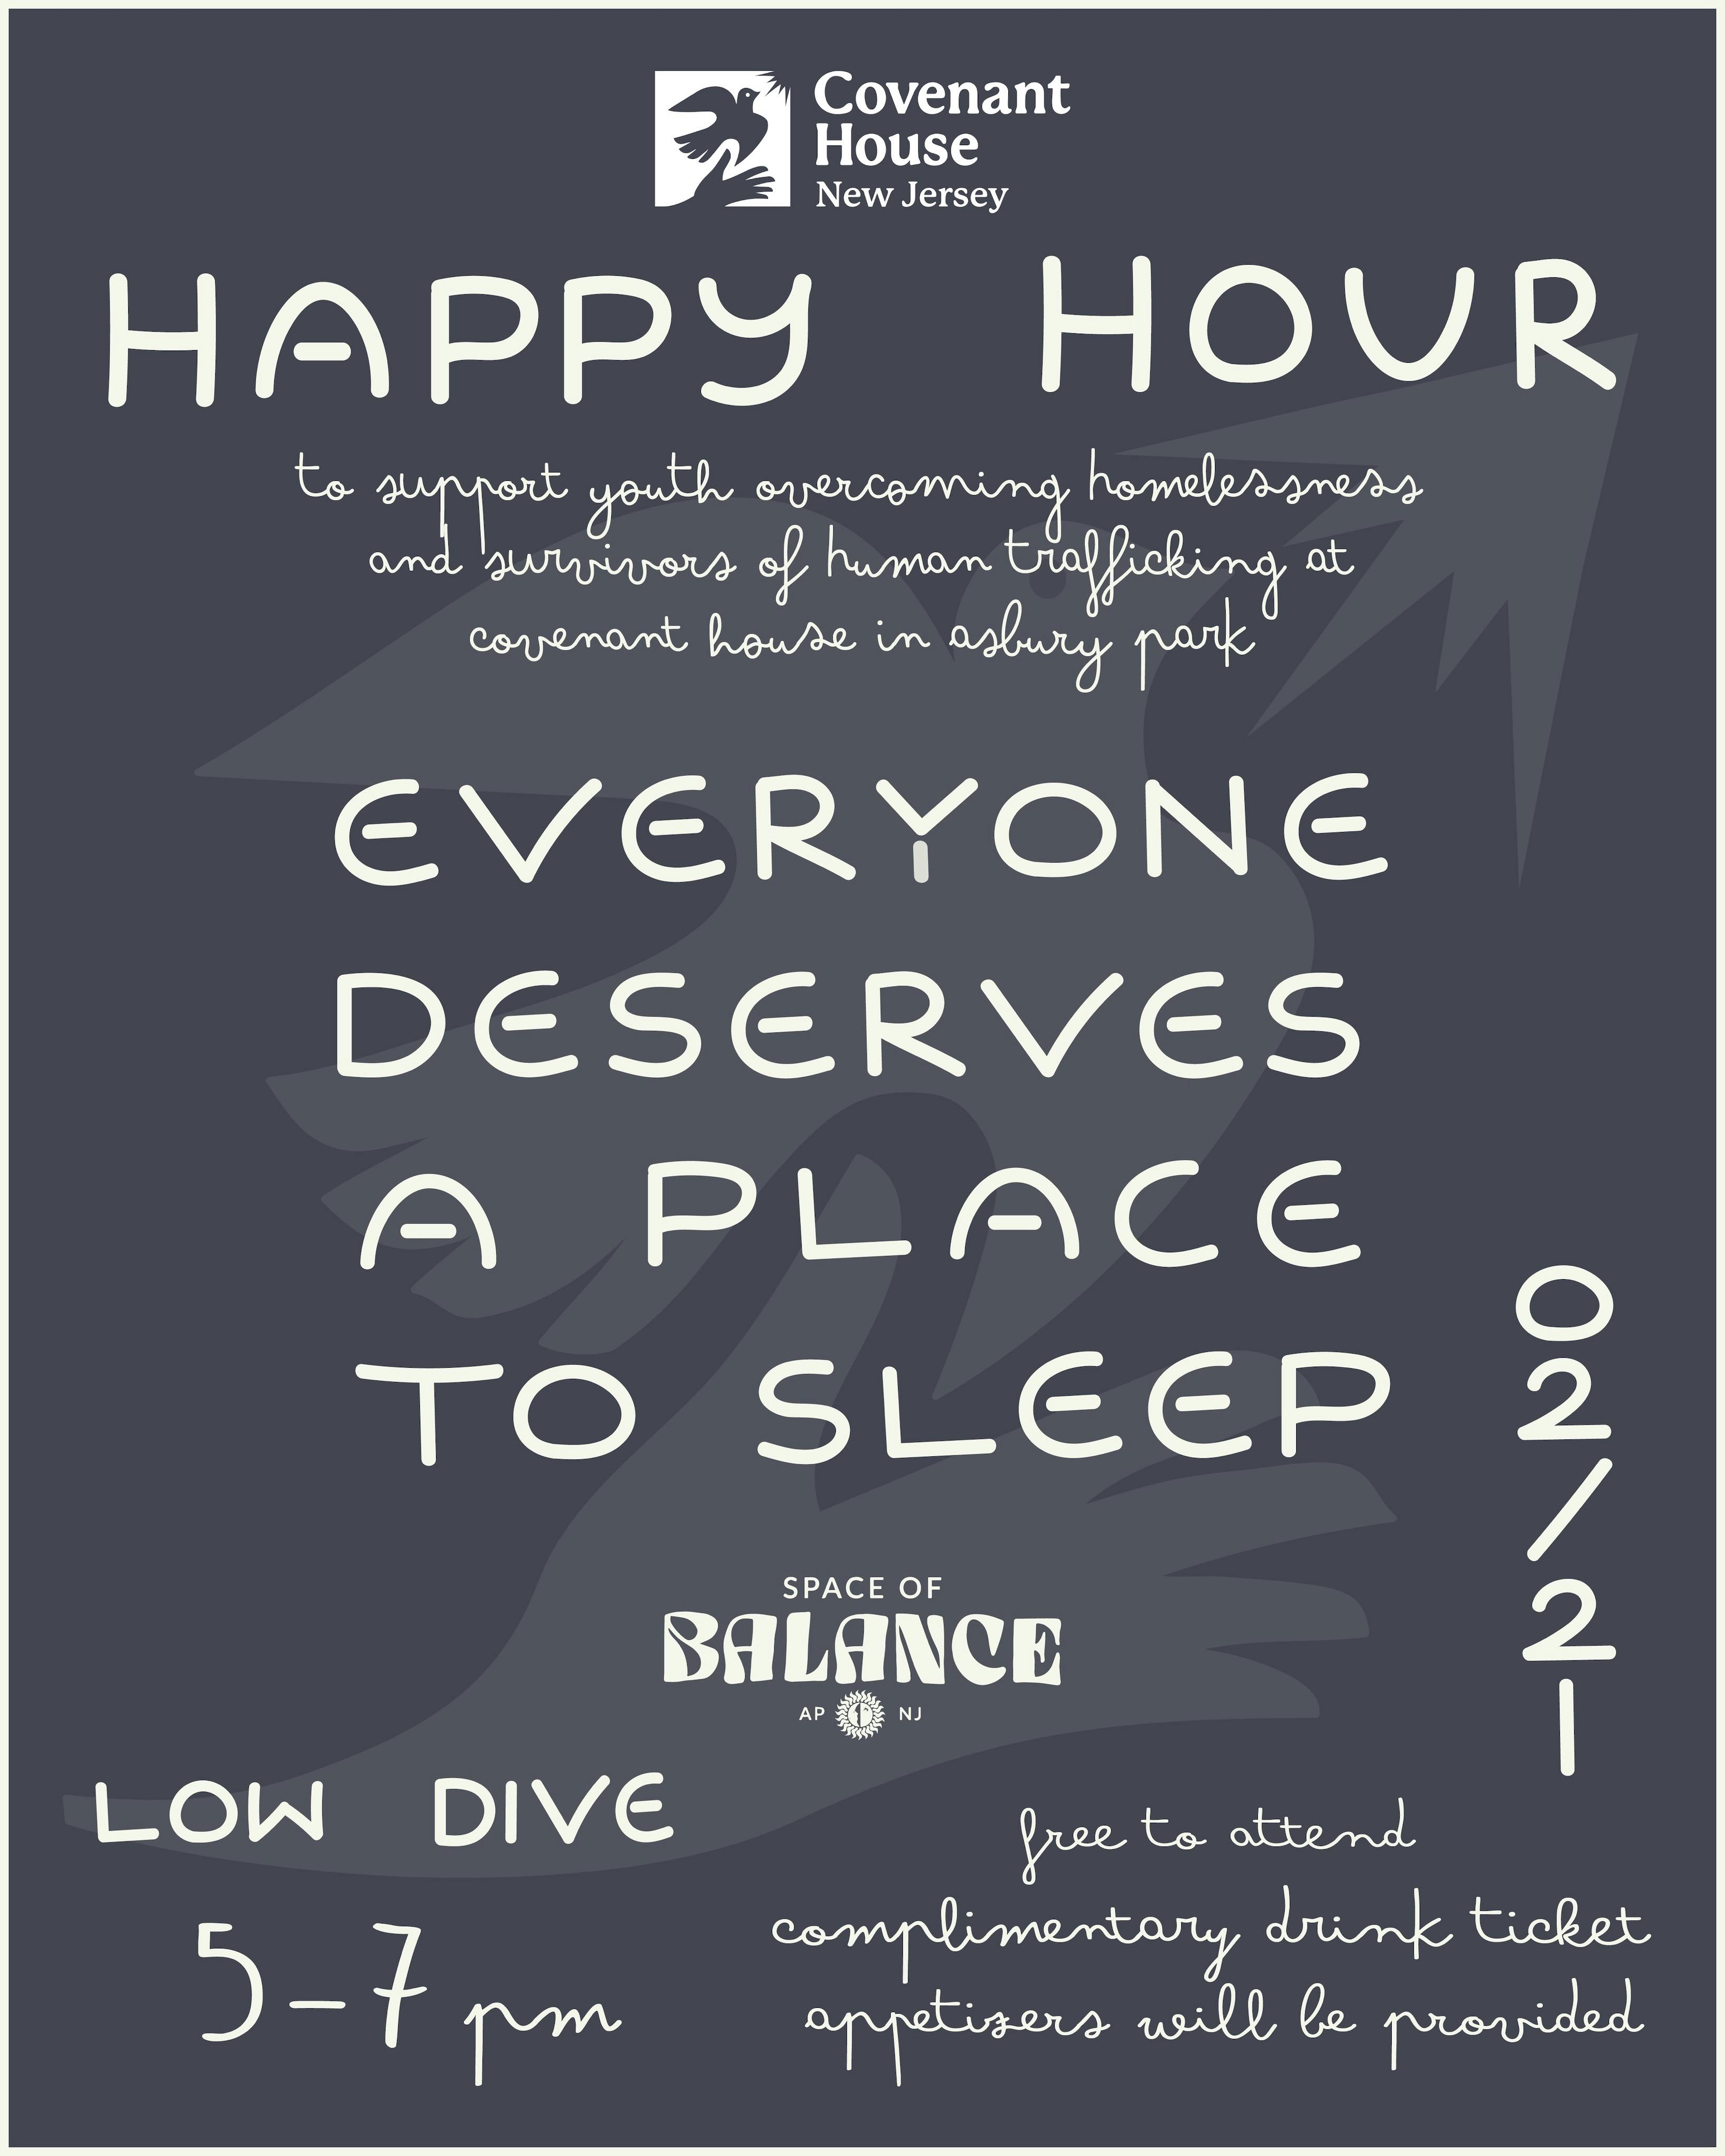 Asbury Park Covenant House Happy Hour Poster